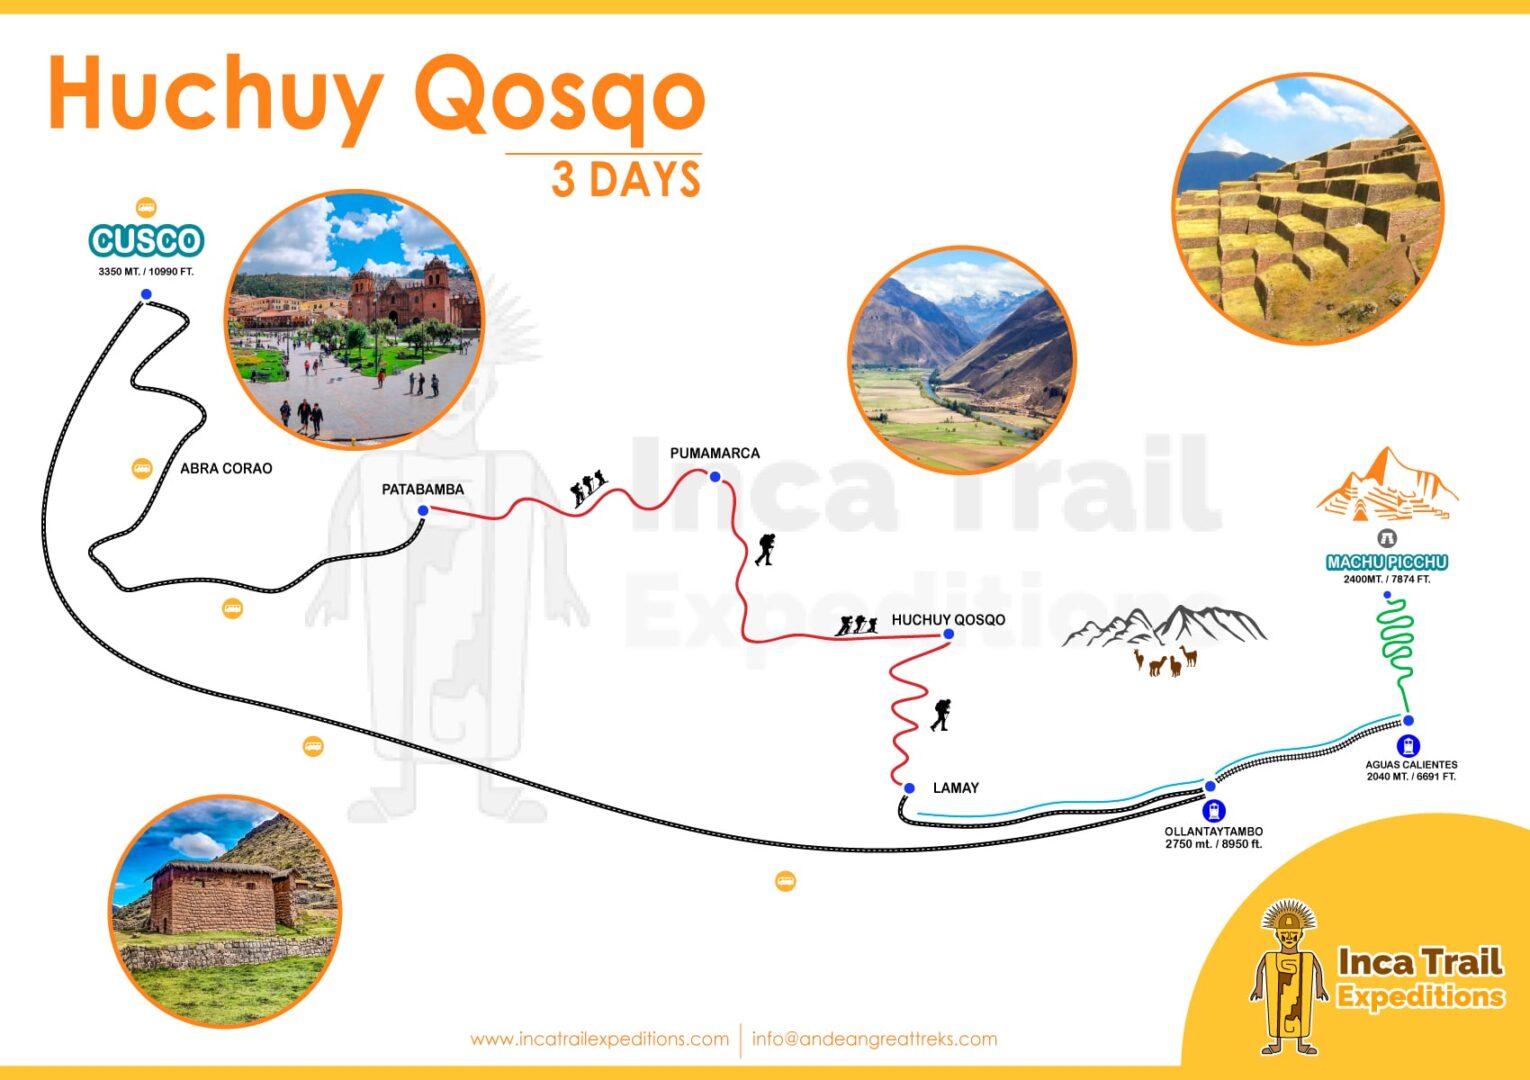 HUCHUY-QOSQO-3-DAYS-BY-INCA-TRAIL-EXPEDITIONS